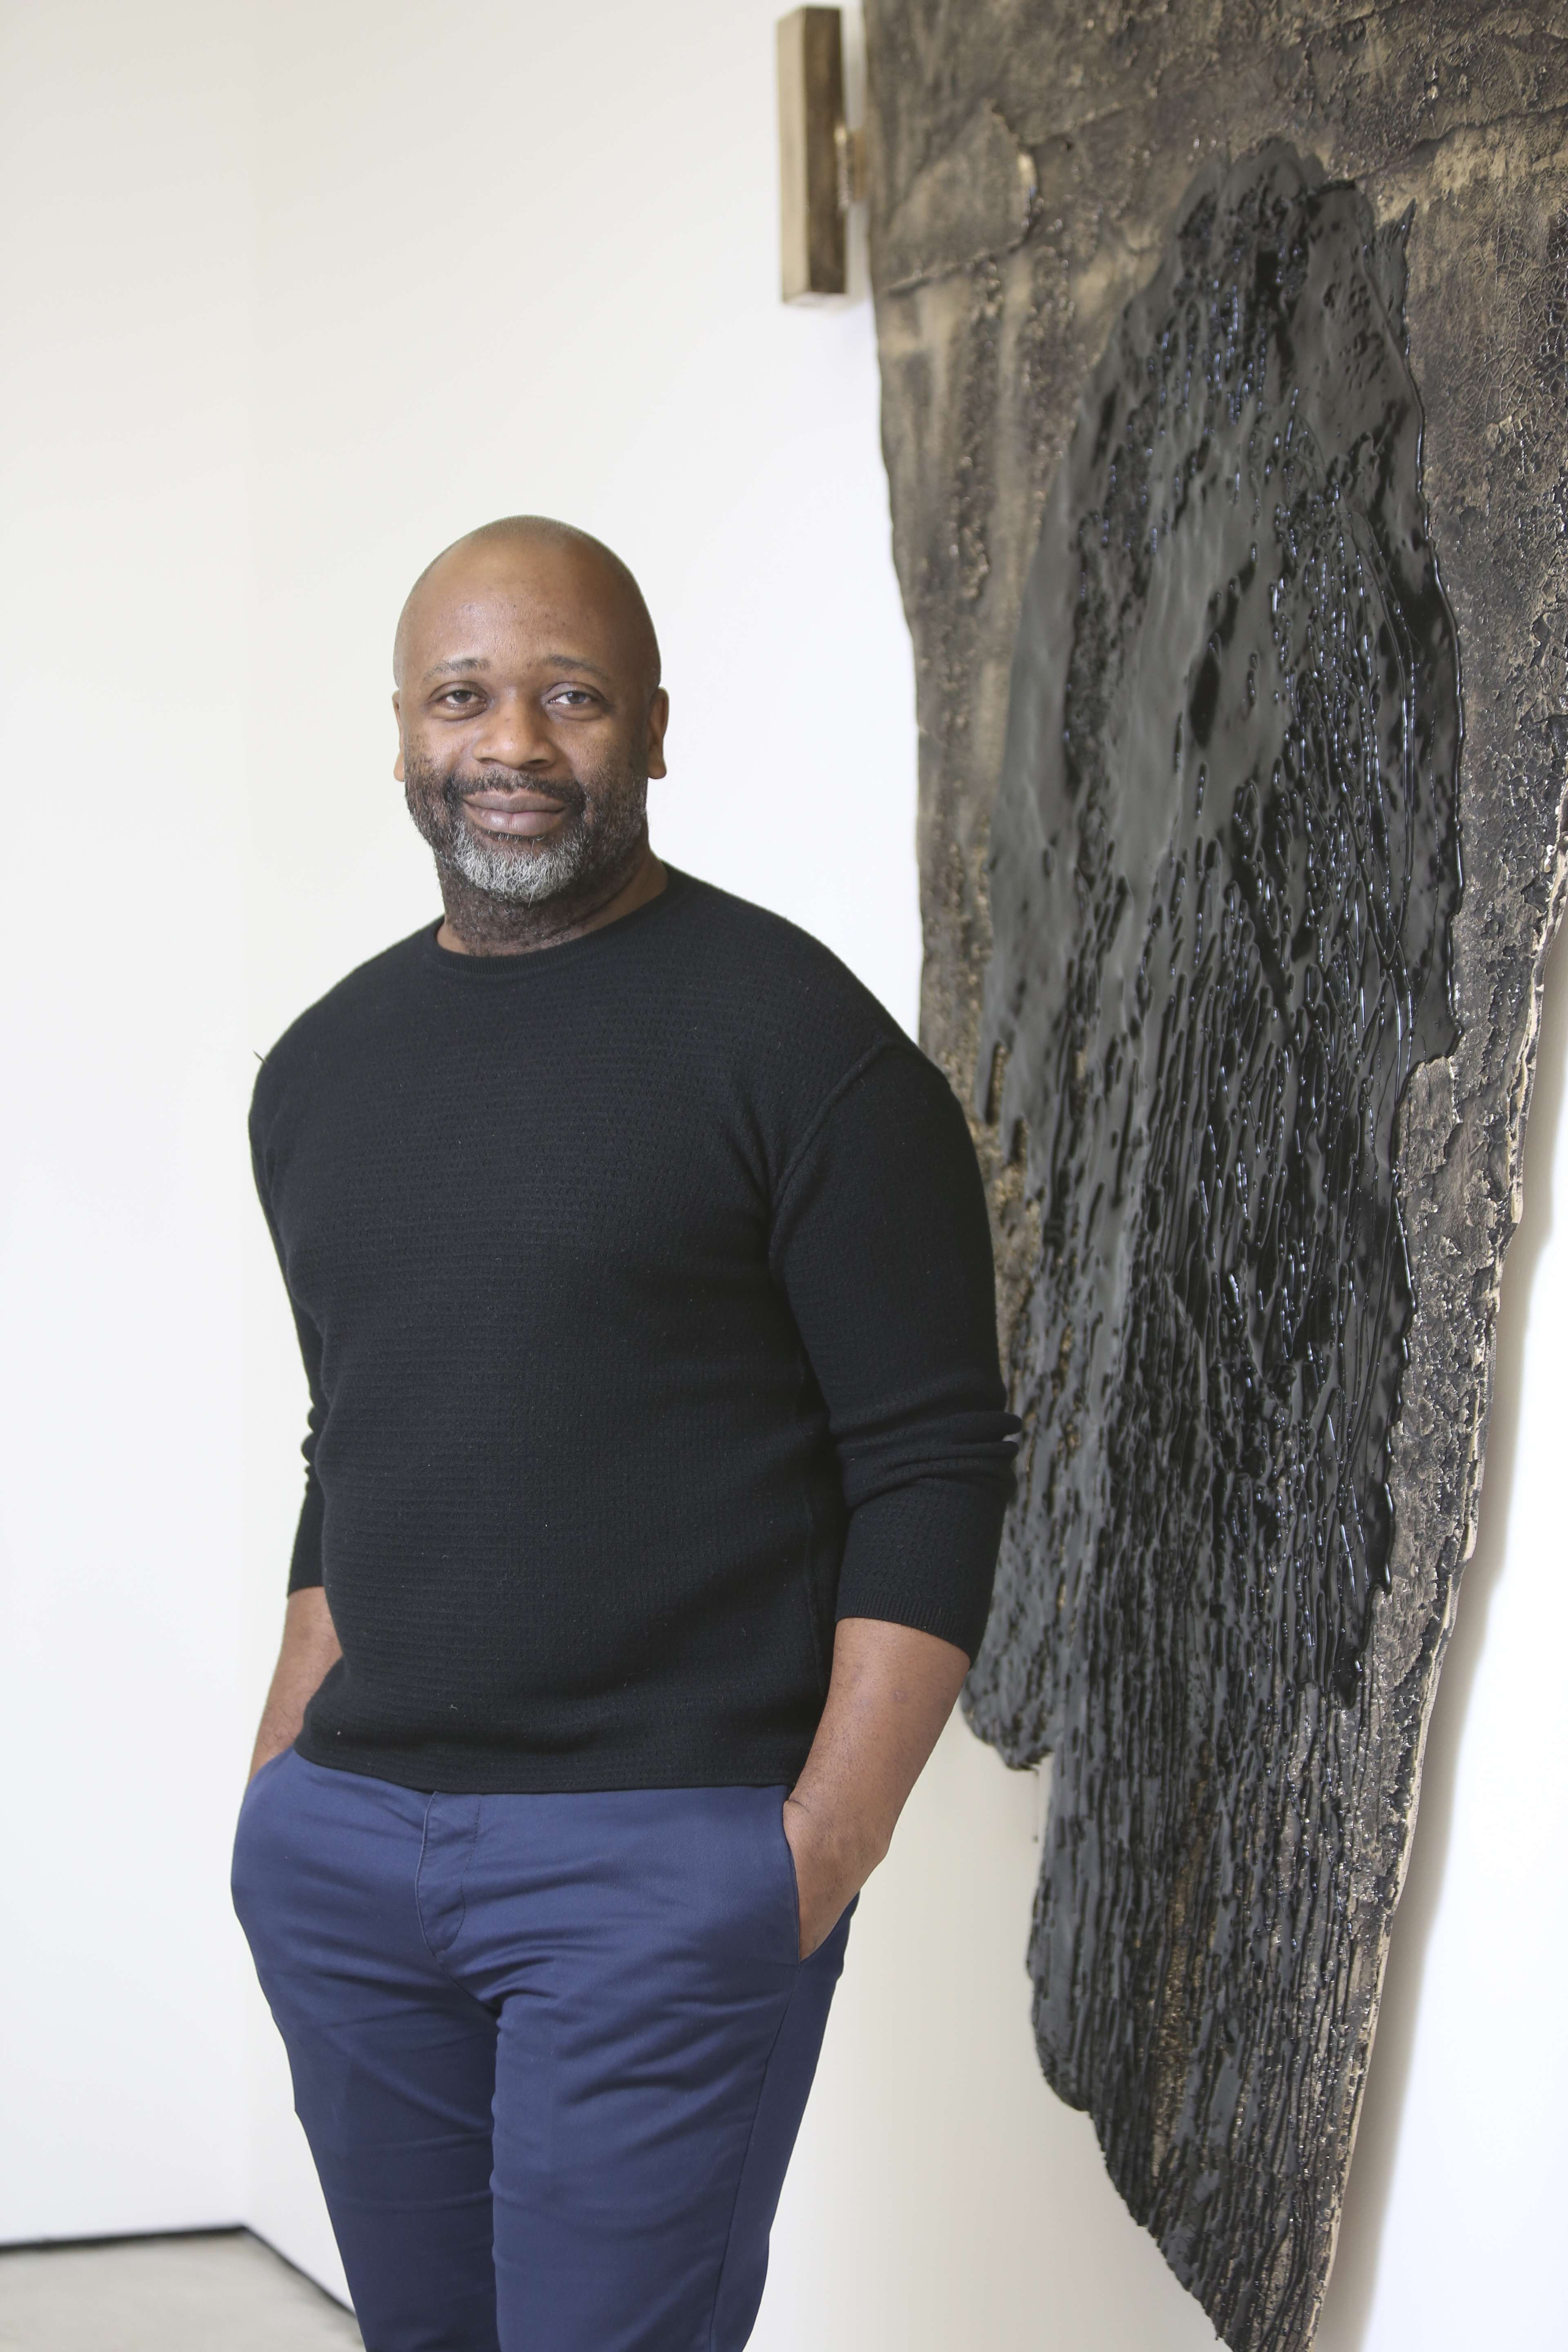 The American, in Hong Kong for his second exhibition, sees hope in his latest work, but ‘not the world’s hope’;  making art ‘is a selfish act’, he says. Yet in Chicago he’s opened, at his expense, a ‘repository for black American culture’